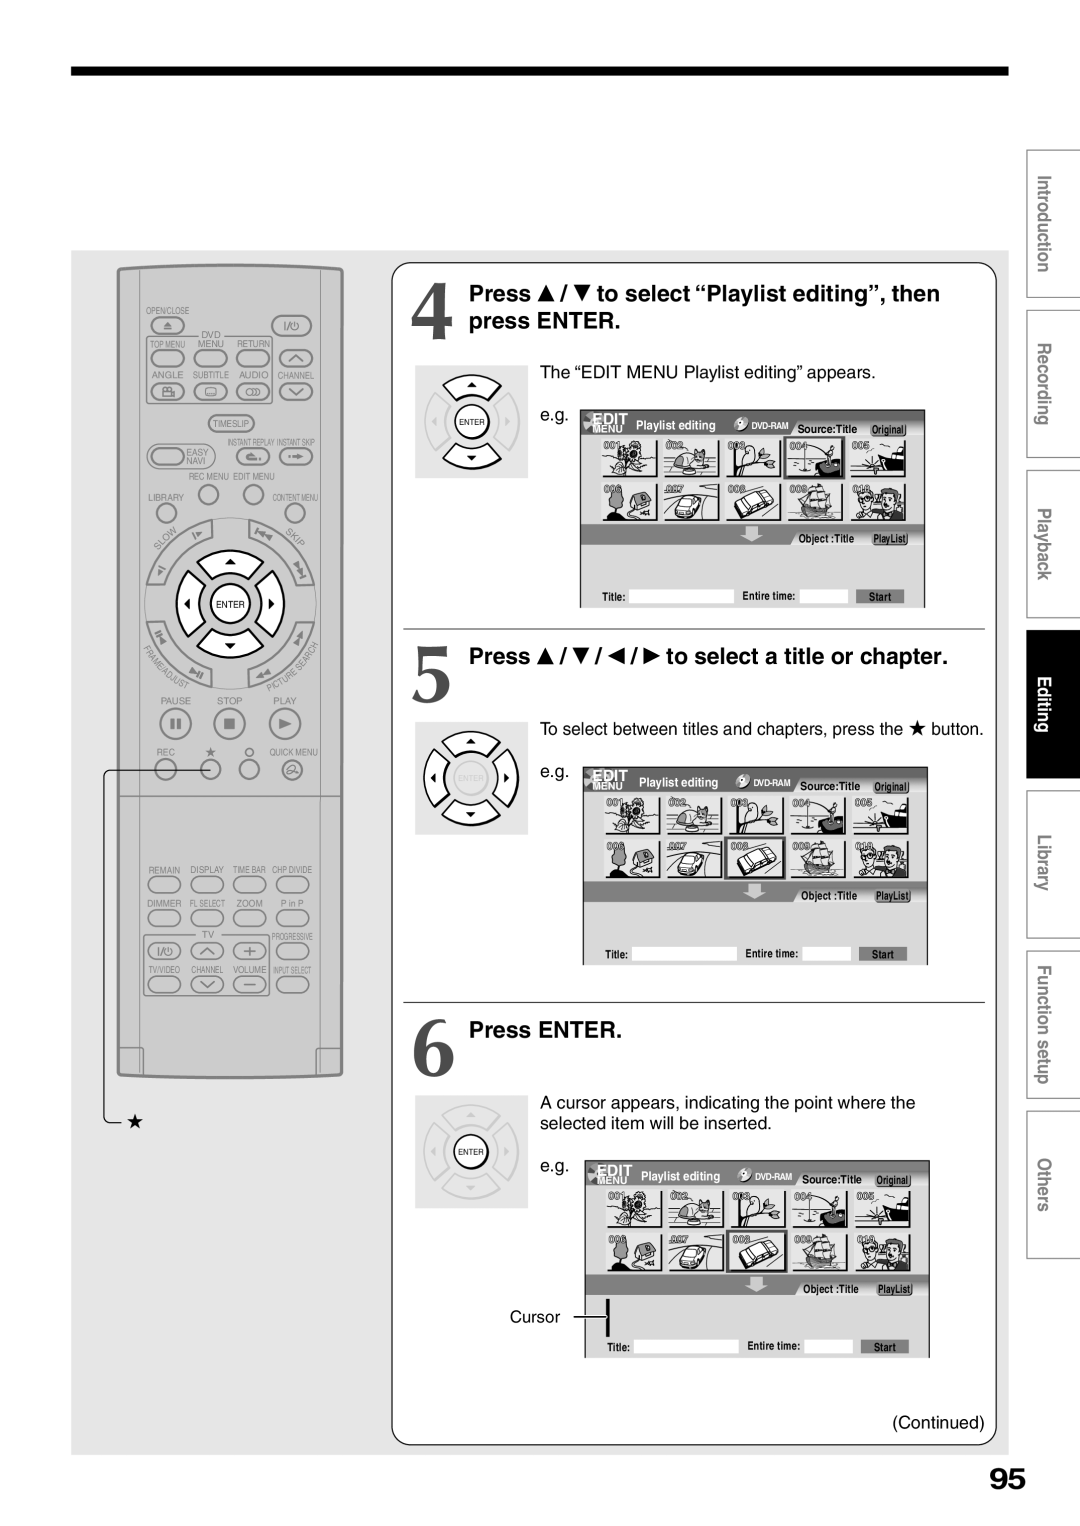 Toshiba D-KR2SU, D-R2SU Press / to select “Playlist editing”, then, press ENTER, to select a title or chapter, Press ENTER 